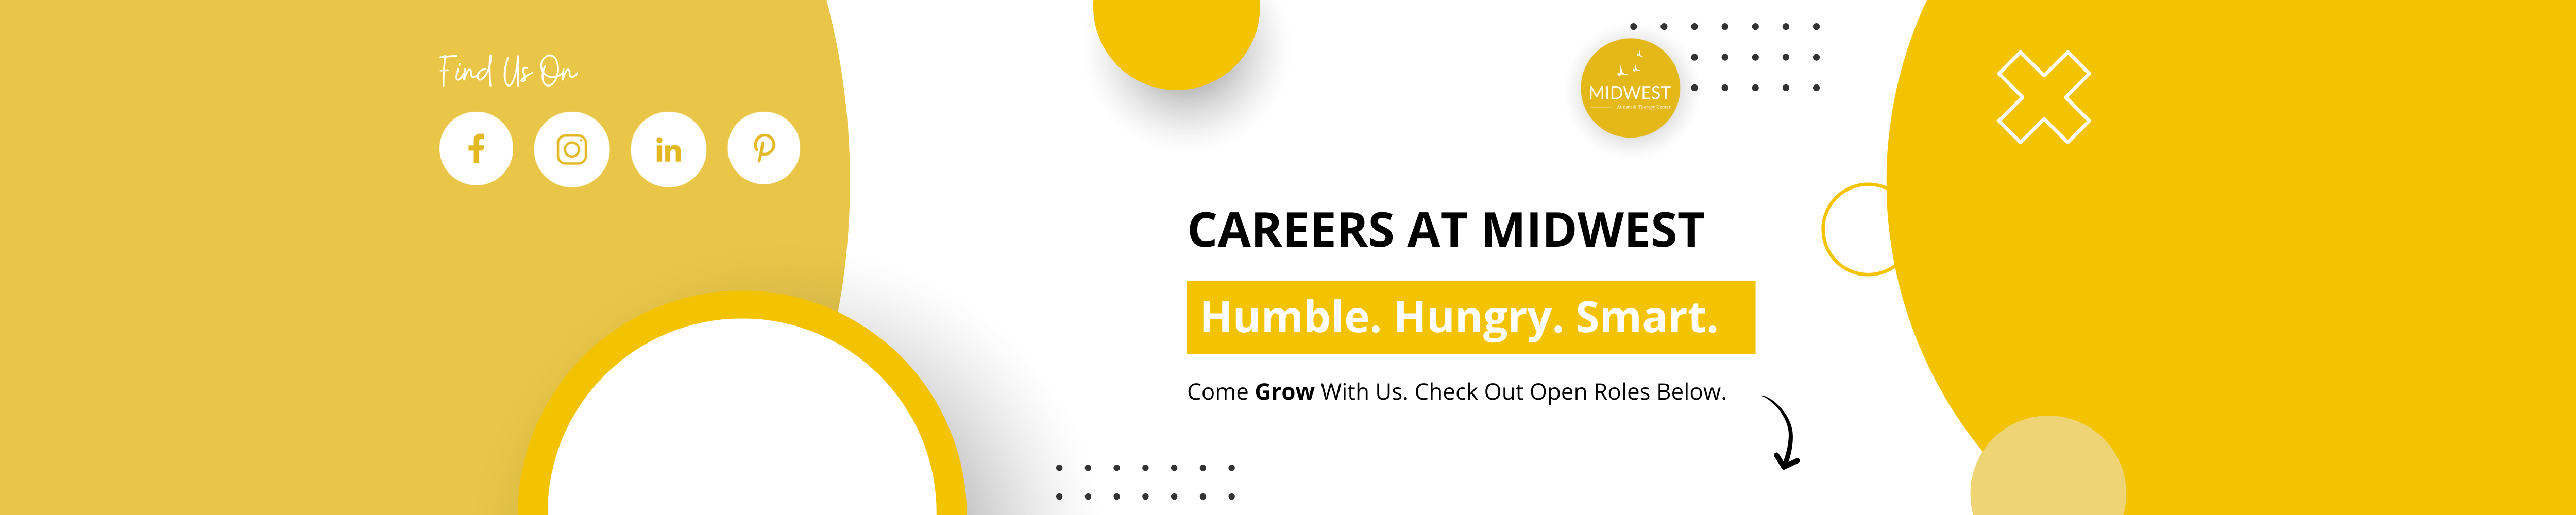 Careers at Midwest